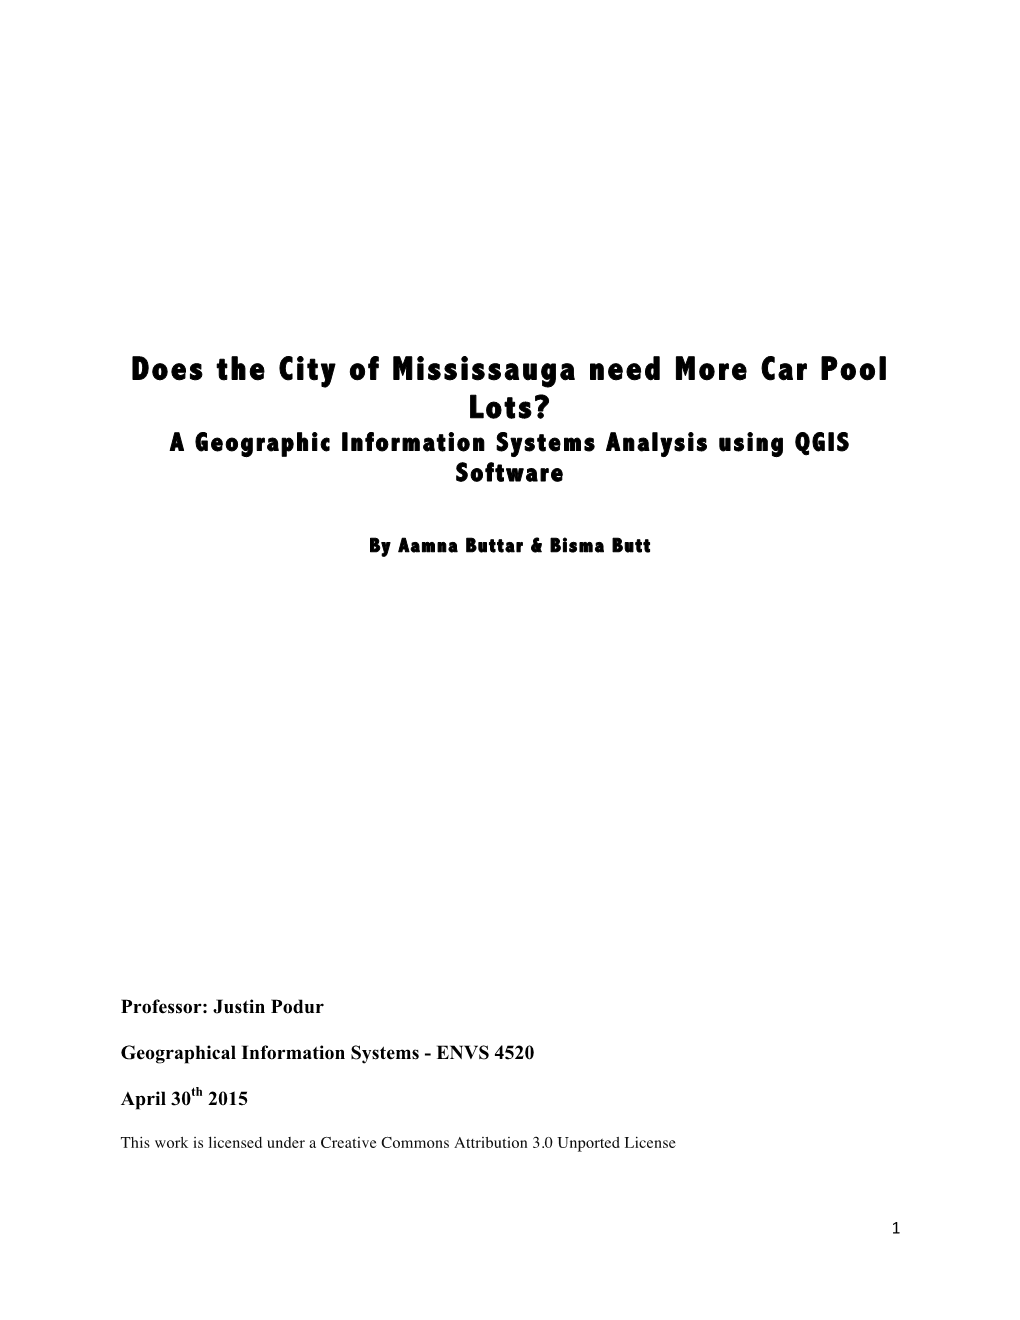 Does the City of Mississauga Need More Car Pool Lots? a Geographic Information Systems Analysis Using QGIS Software